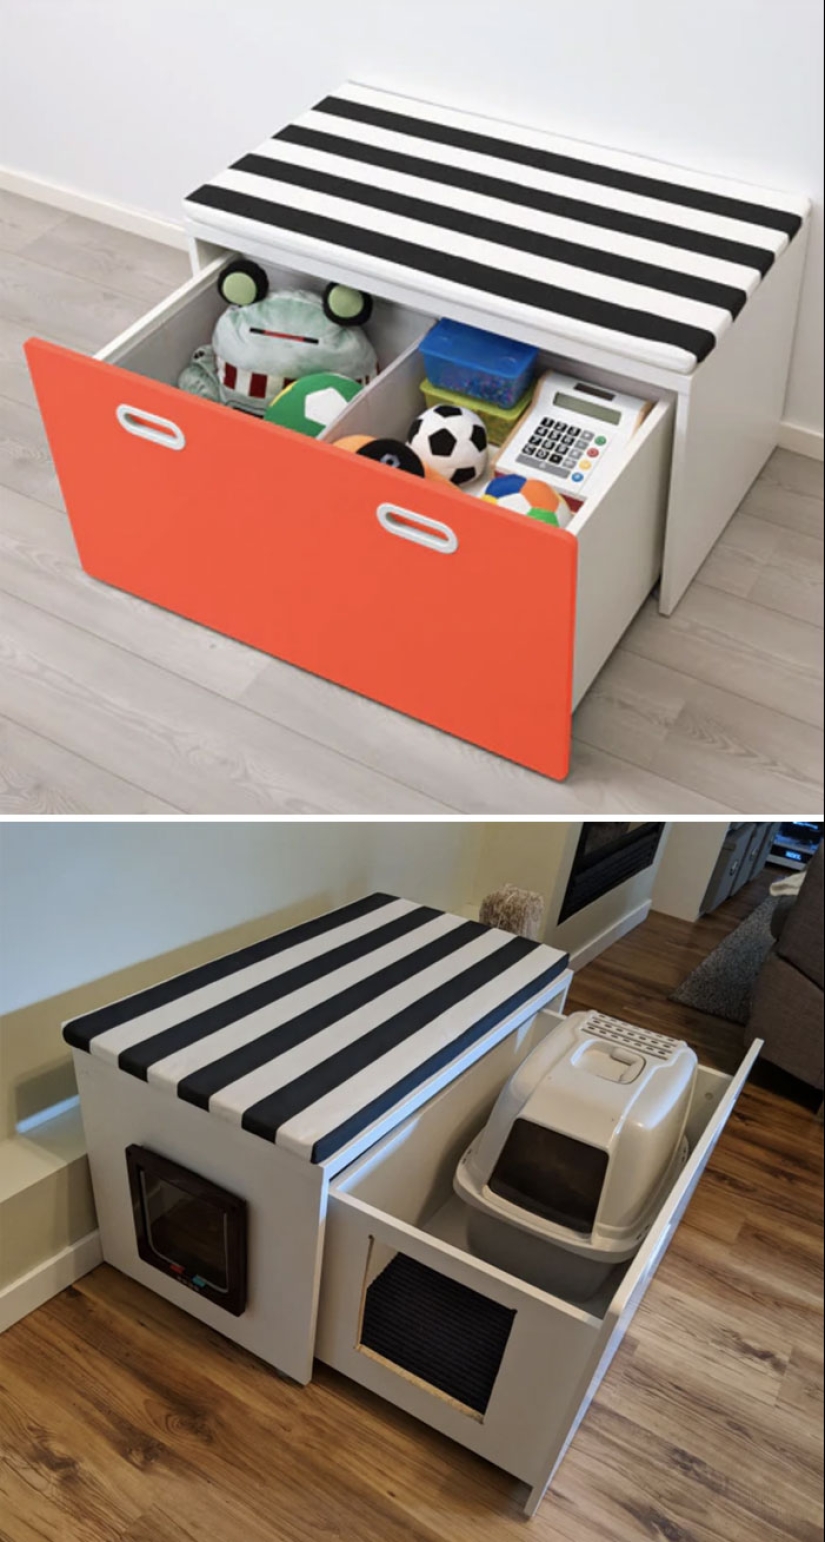 50 examples of how people have modified IKEA furniture and being creative